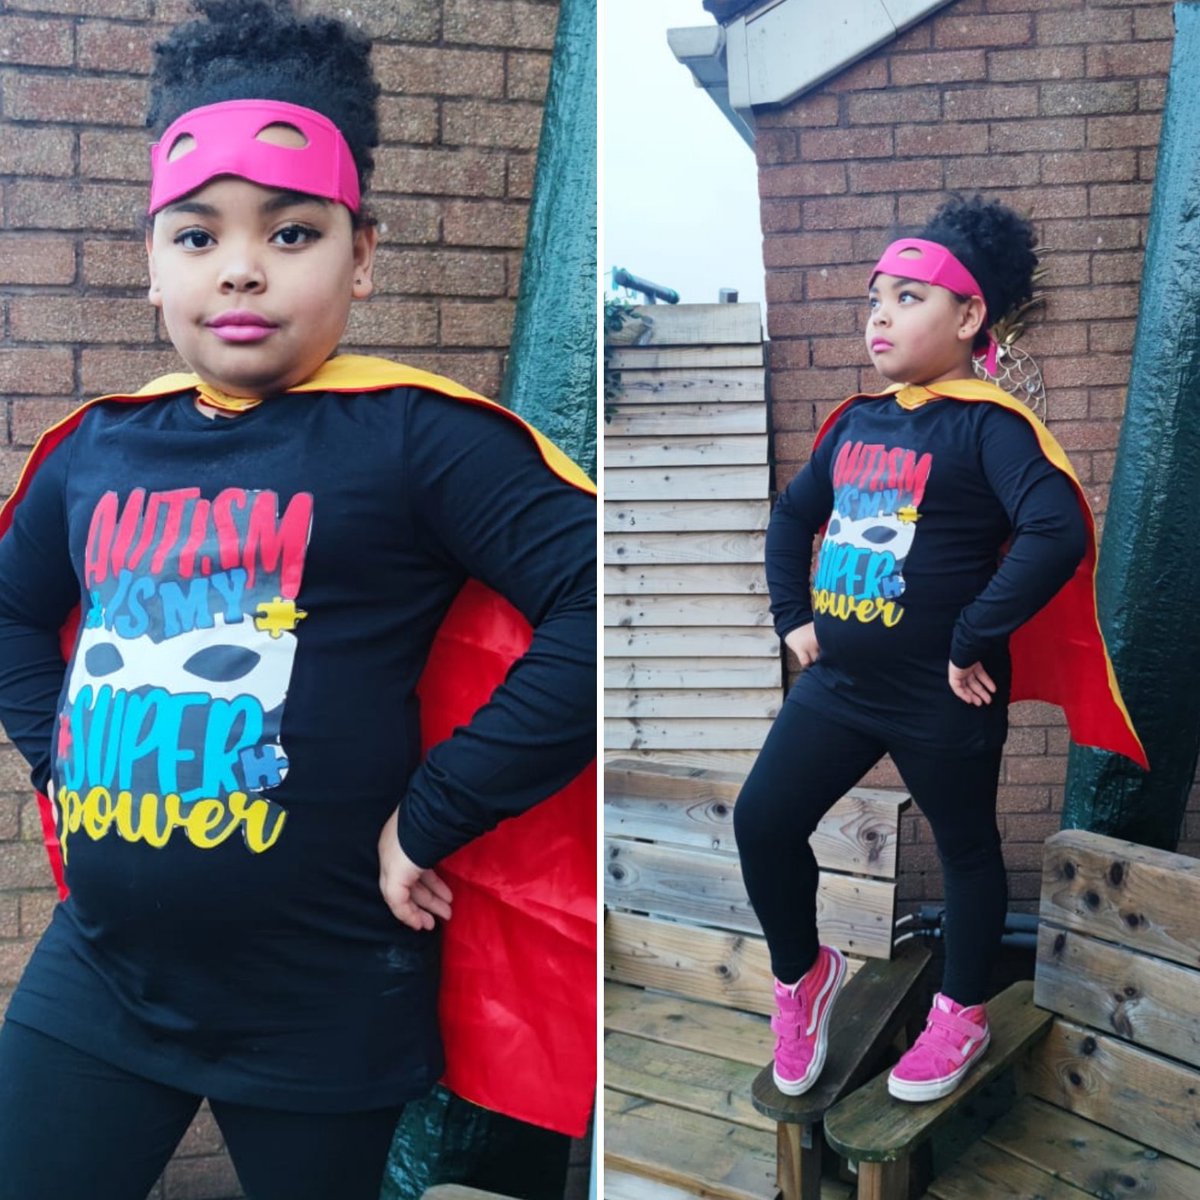 'Autism is my super power'
 Superhero week at school in support of AutismNI. Of course she claims she doesn't need to dress up as a character superhero as she claims that Autism is her superpower, so therefore she's her own superhero ❤️🧡💛💚💙  @principalhfps